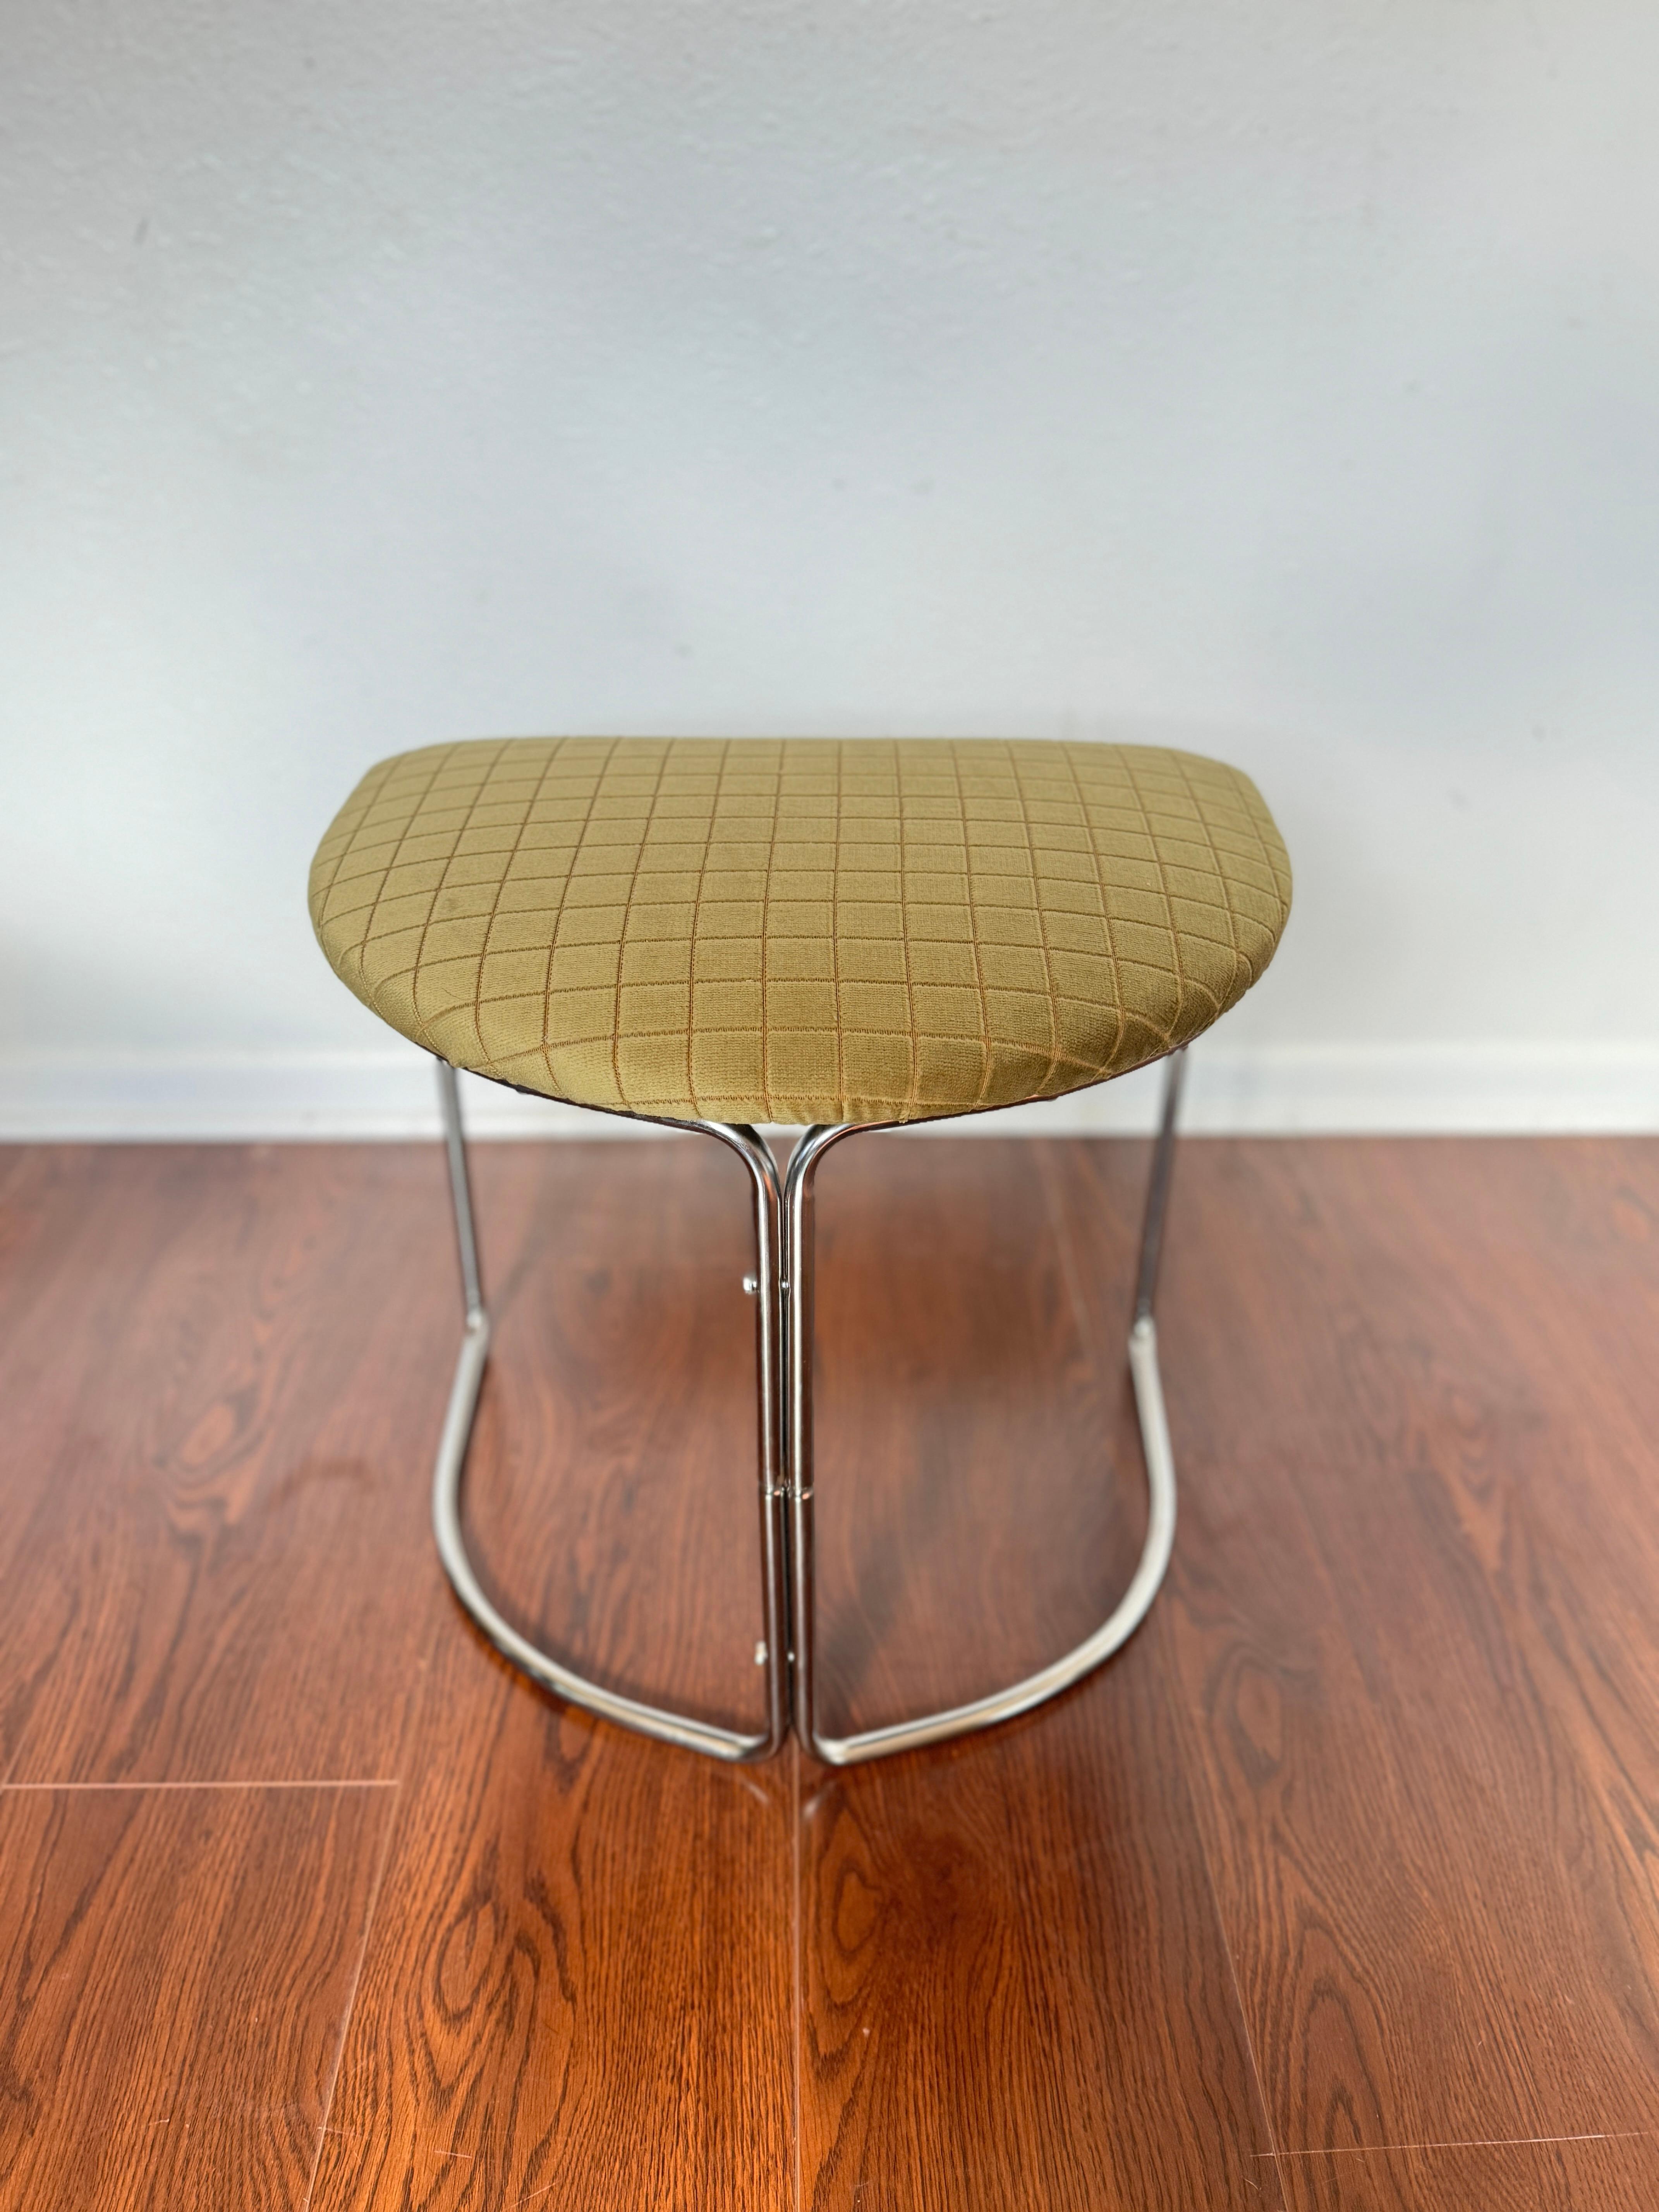 Space age stool by Cisco circa 1970s. Reupholstered in 100% cotton check velvet  In Good Condition For Sale In Houston, TX